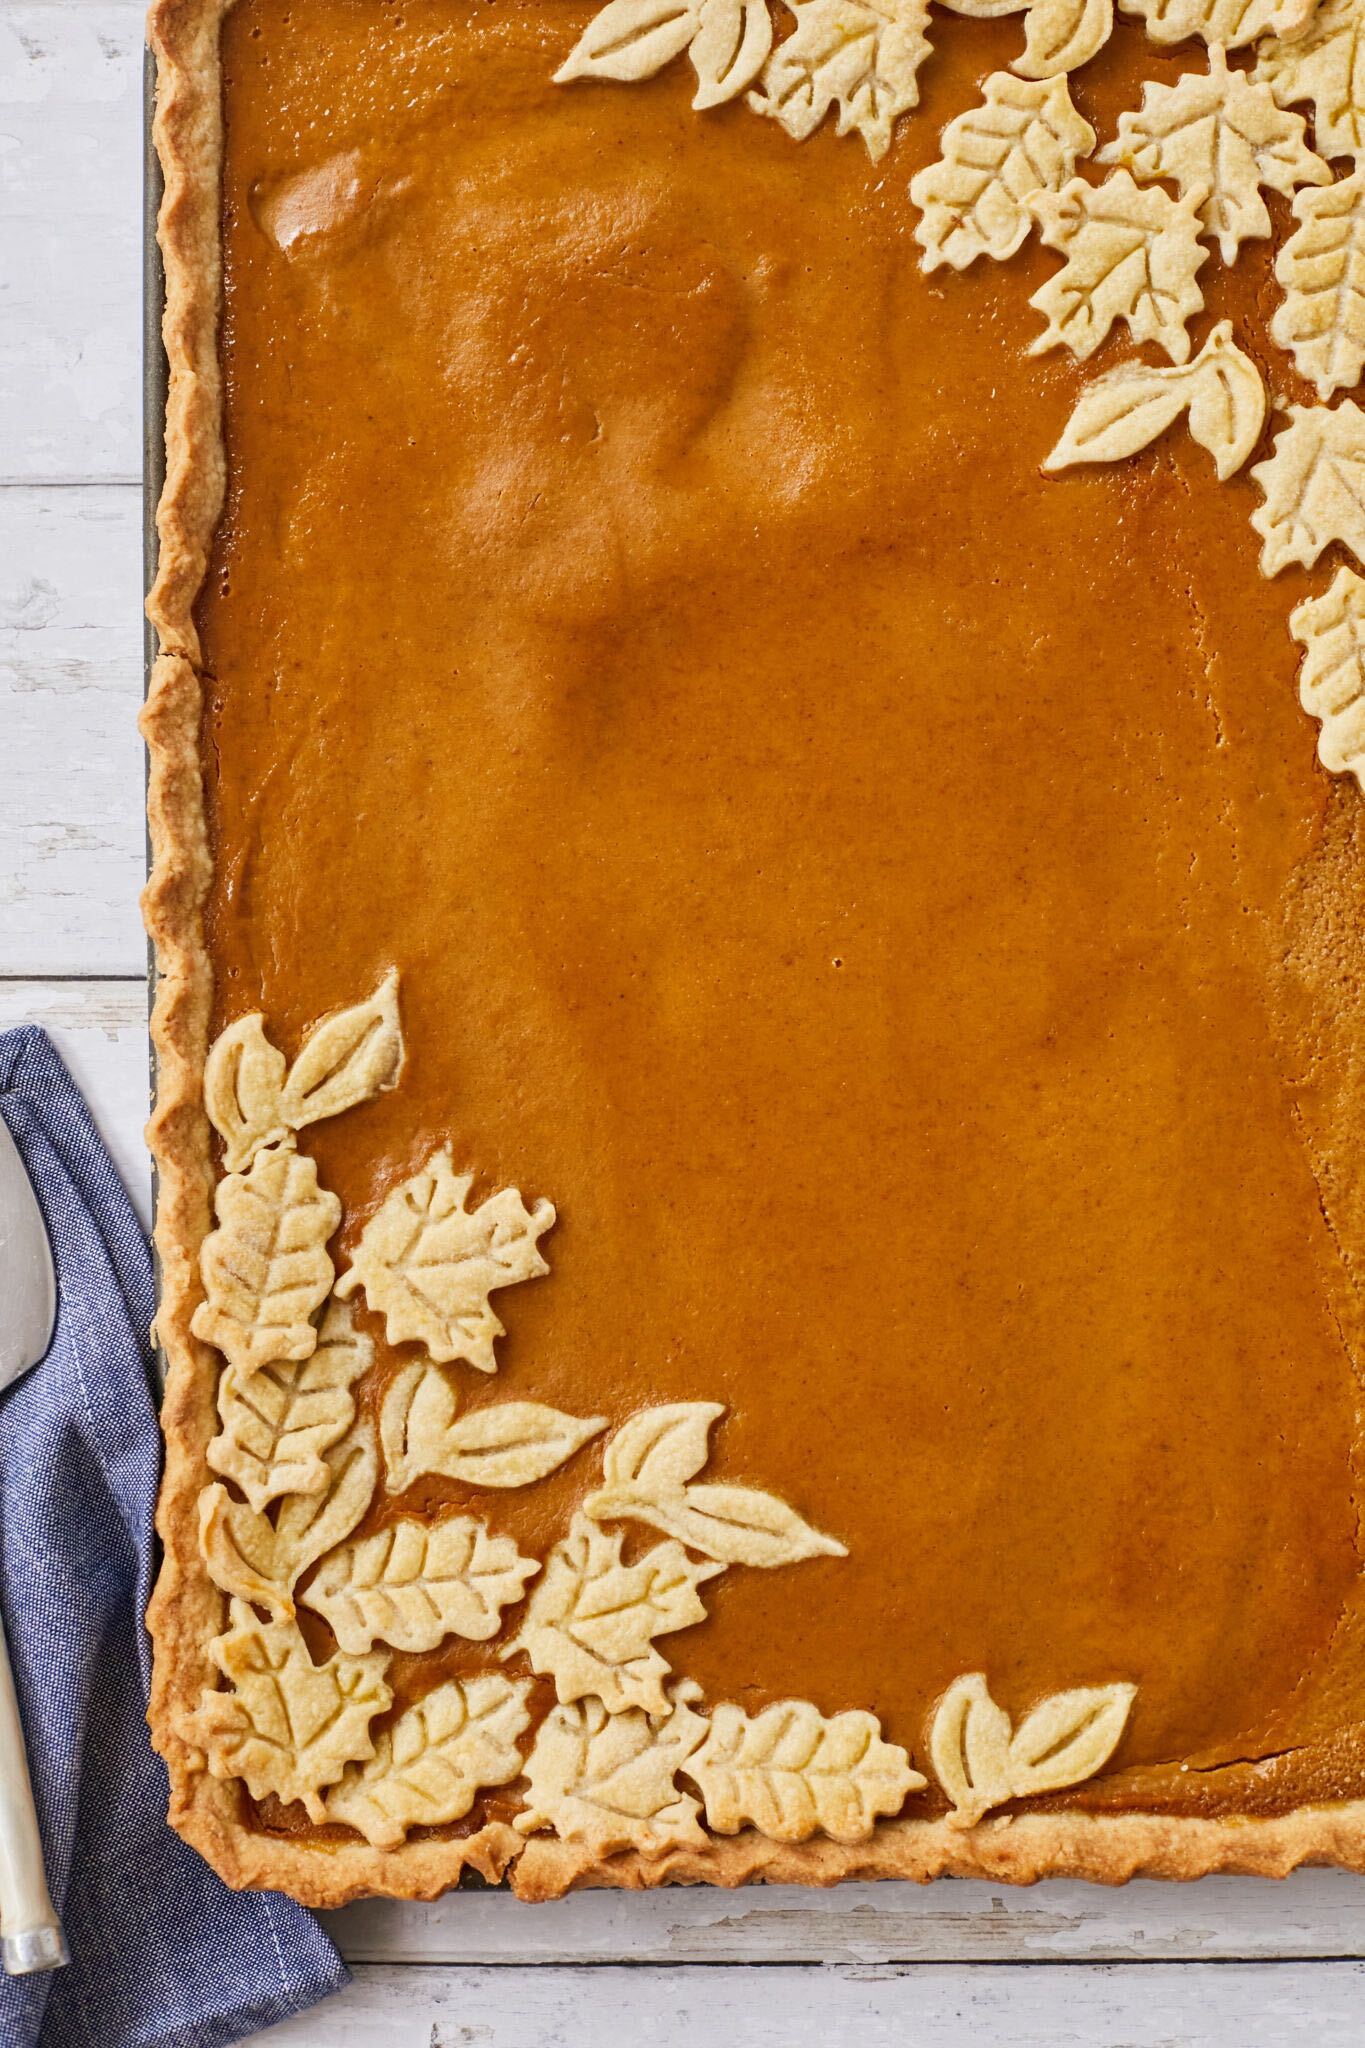 The Incredible Pumpkin Slab Pie is baked to perfection with golden crust, beautifully cut-out pastry leaves, and silky smooth filling in golden orange color. 